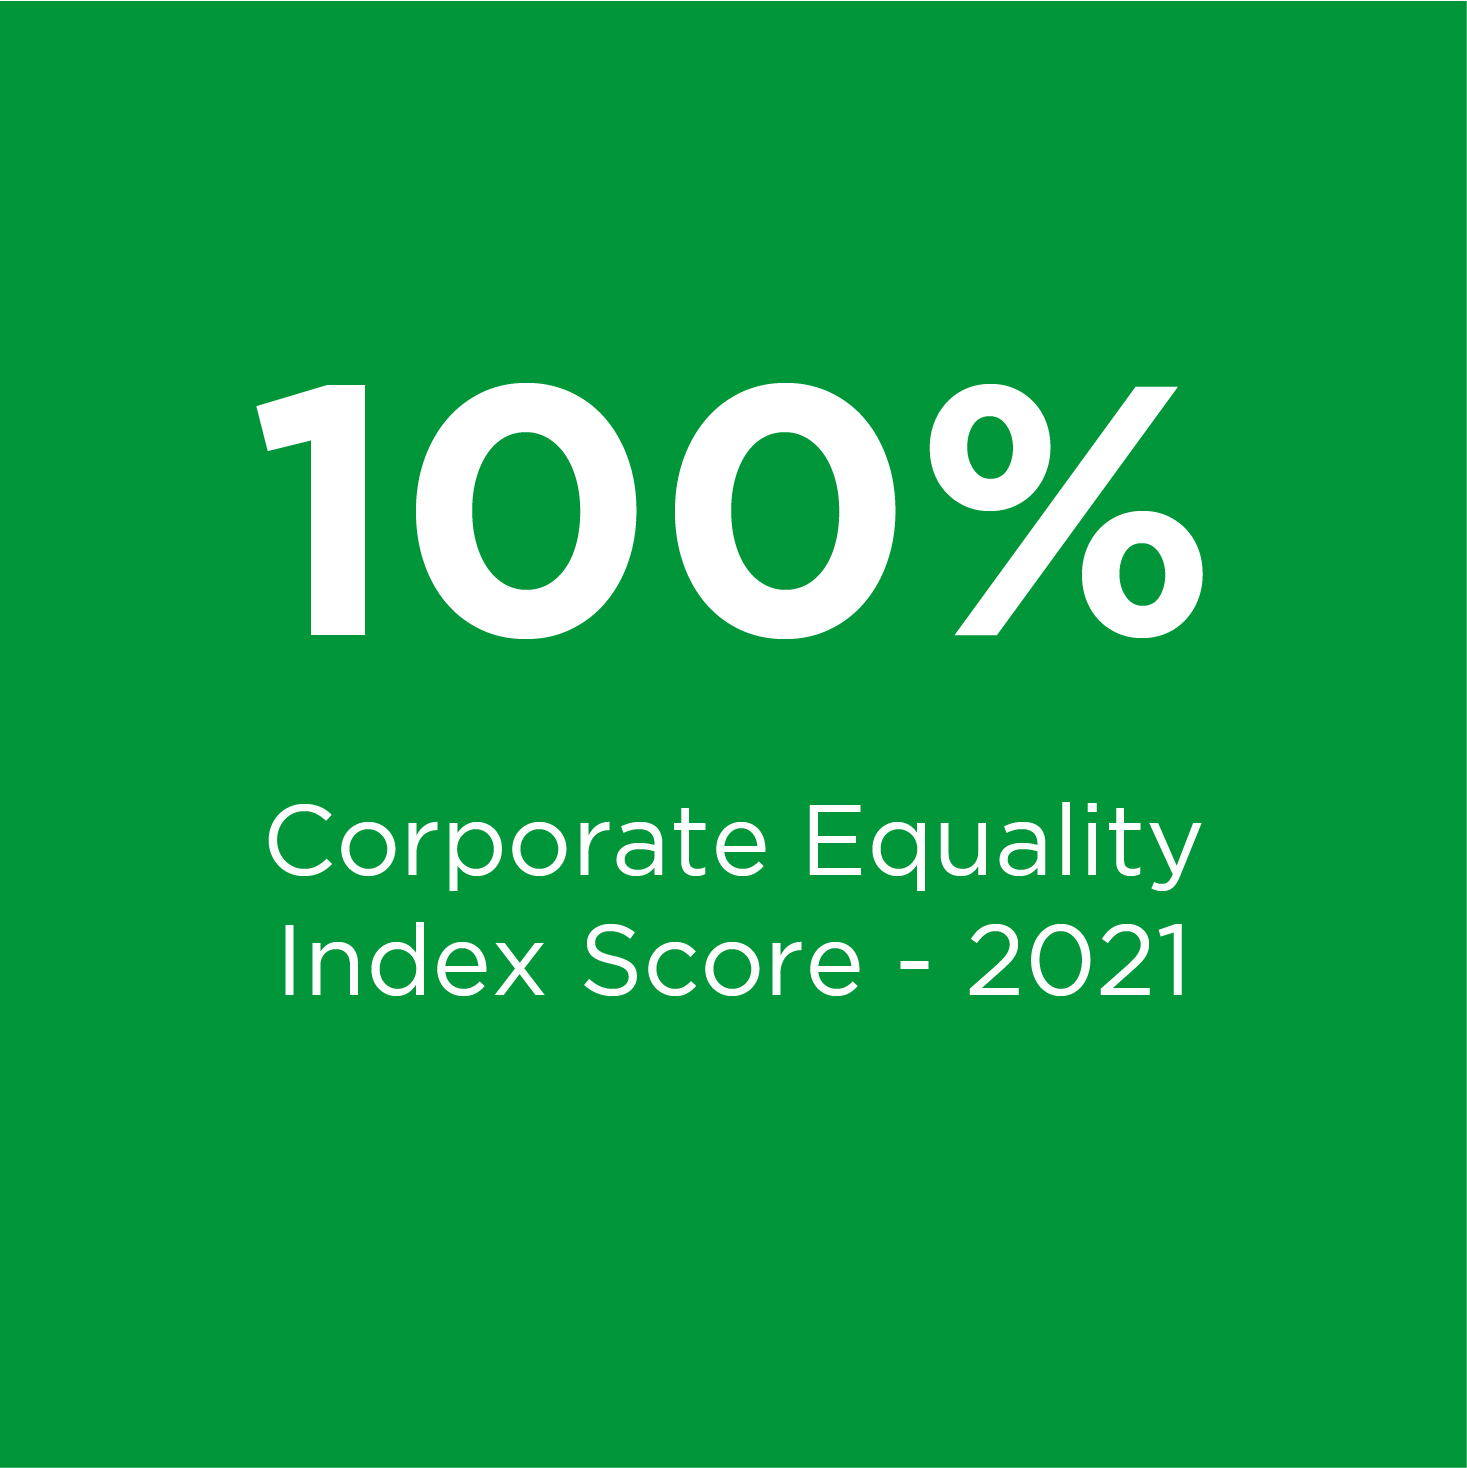 100% Corporate Equality Index Score - 2021